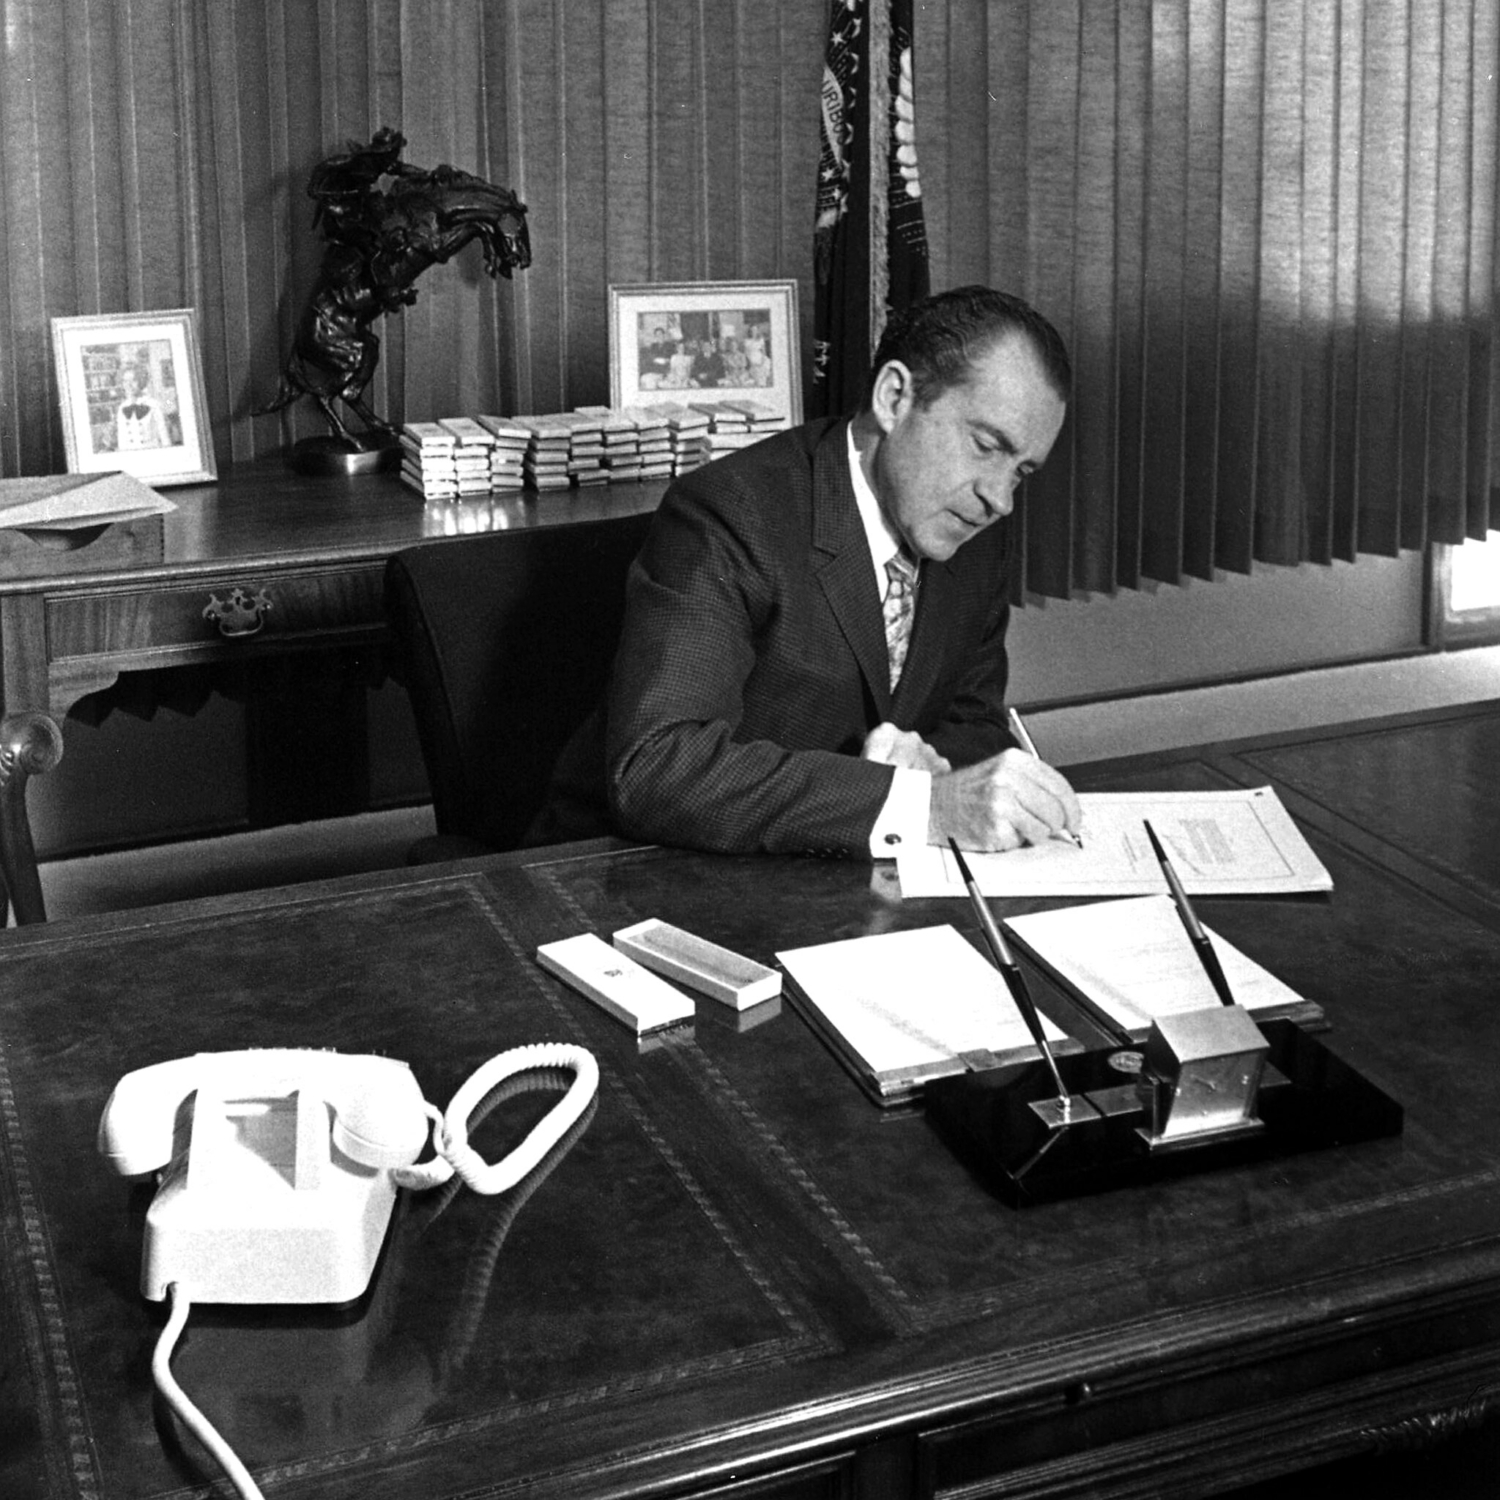 President Nixon signs the National Environmental Policy Act (NEPA) on January 1, 1970.